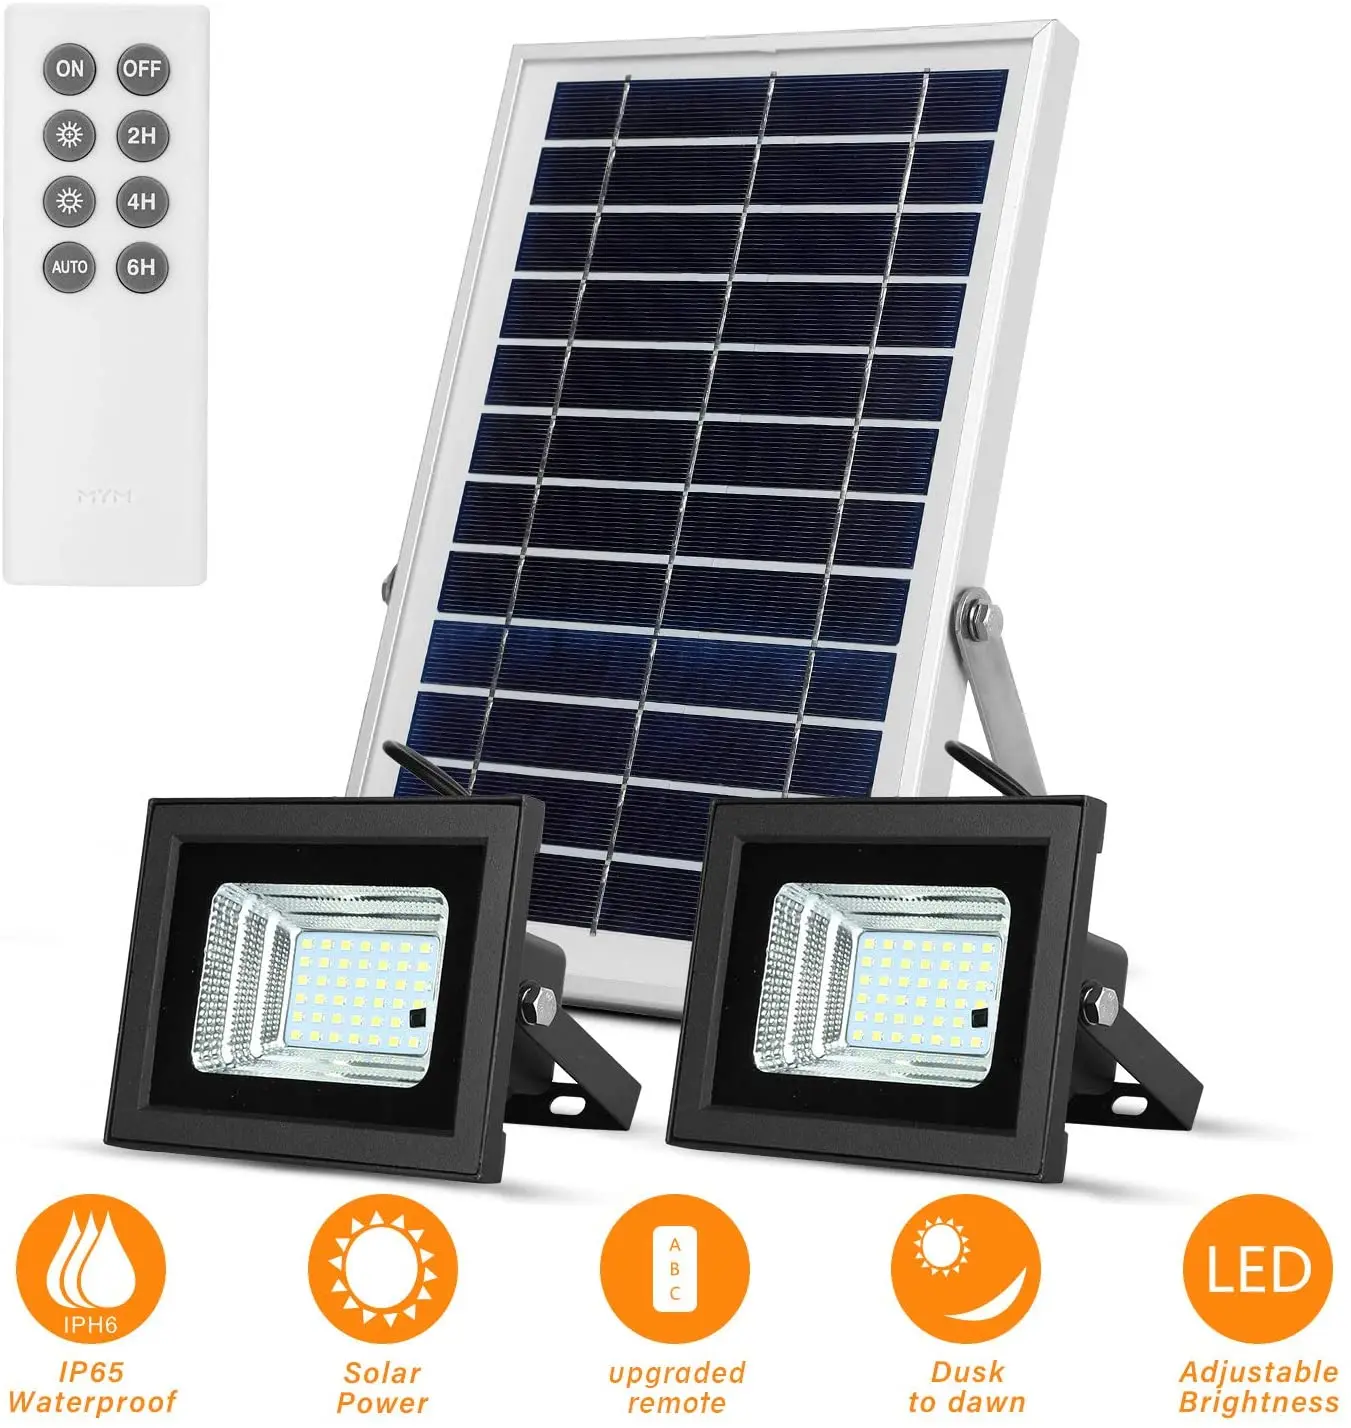 Solar Flood Lights Led Lights Remote Solar Lights Dusk to Dawn Solar Security Light with 6W 800 LM Dual 42 LEDs IP65 Waterproof